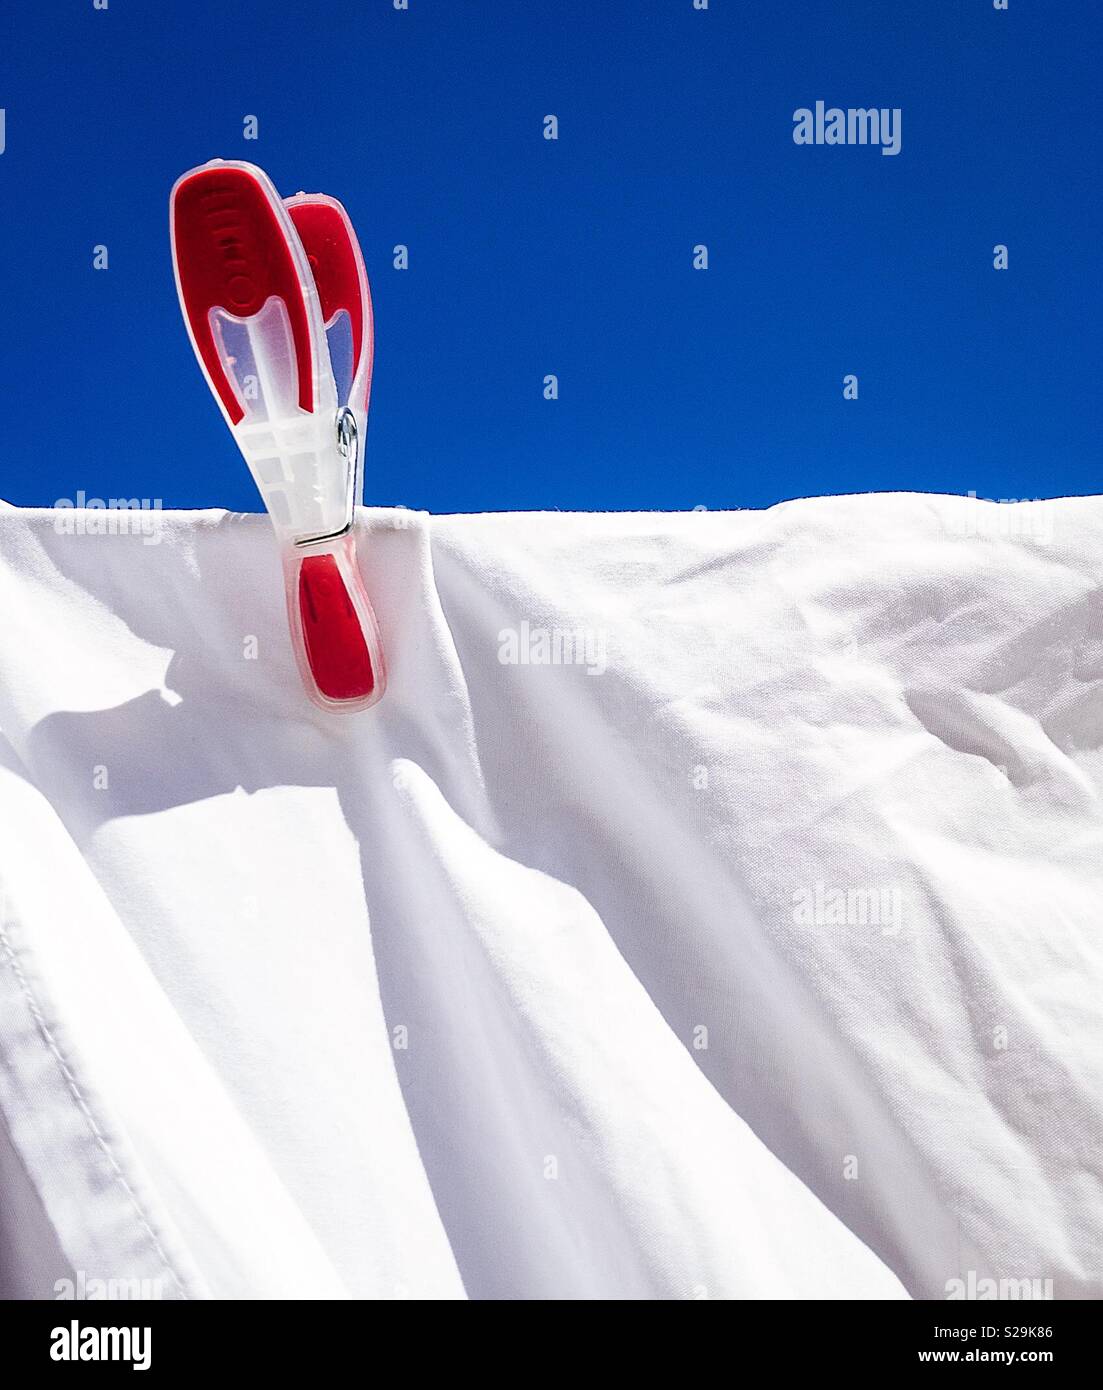 Red, white and blue. Always dreaming of France. White sheet on a washing line with a red peg and a blue sky Stock Photo